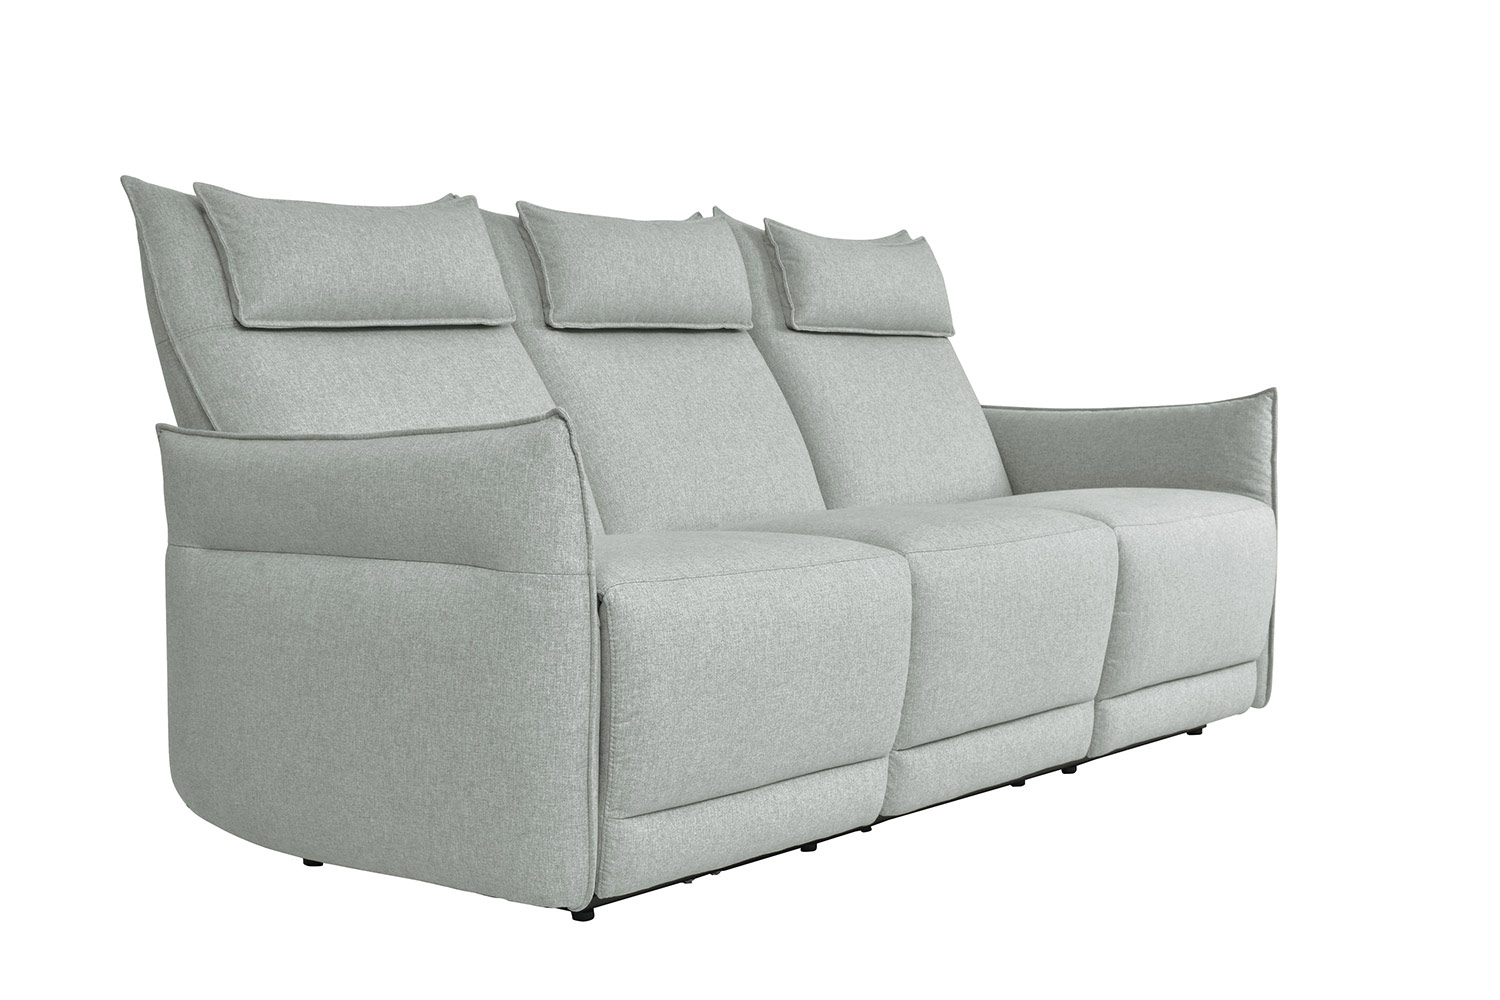 Homelegance Linette Power Double Reclining Sofa with Power Headrests - Ocean